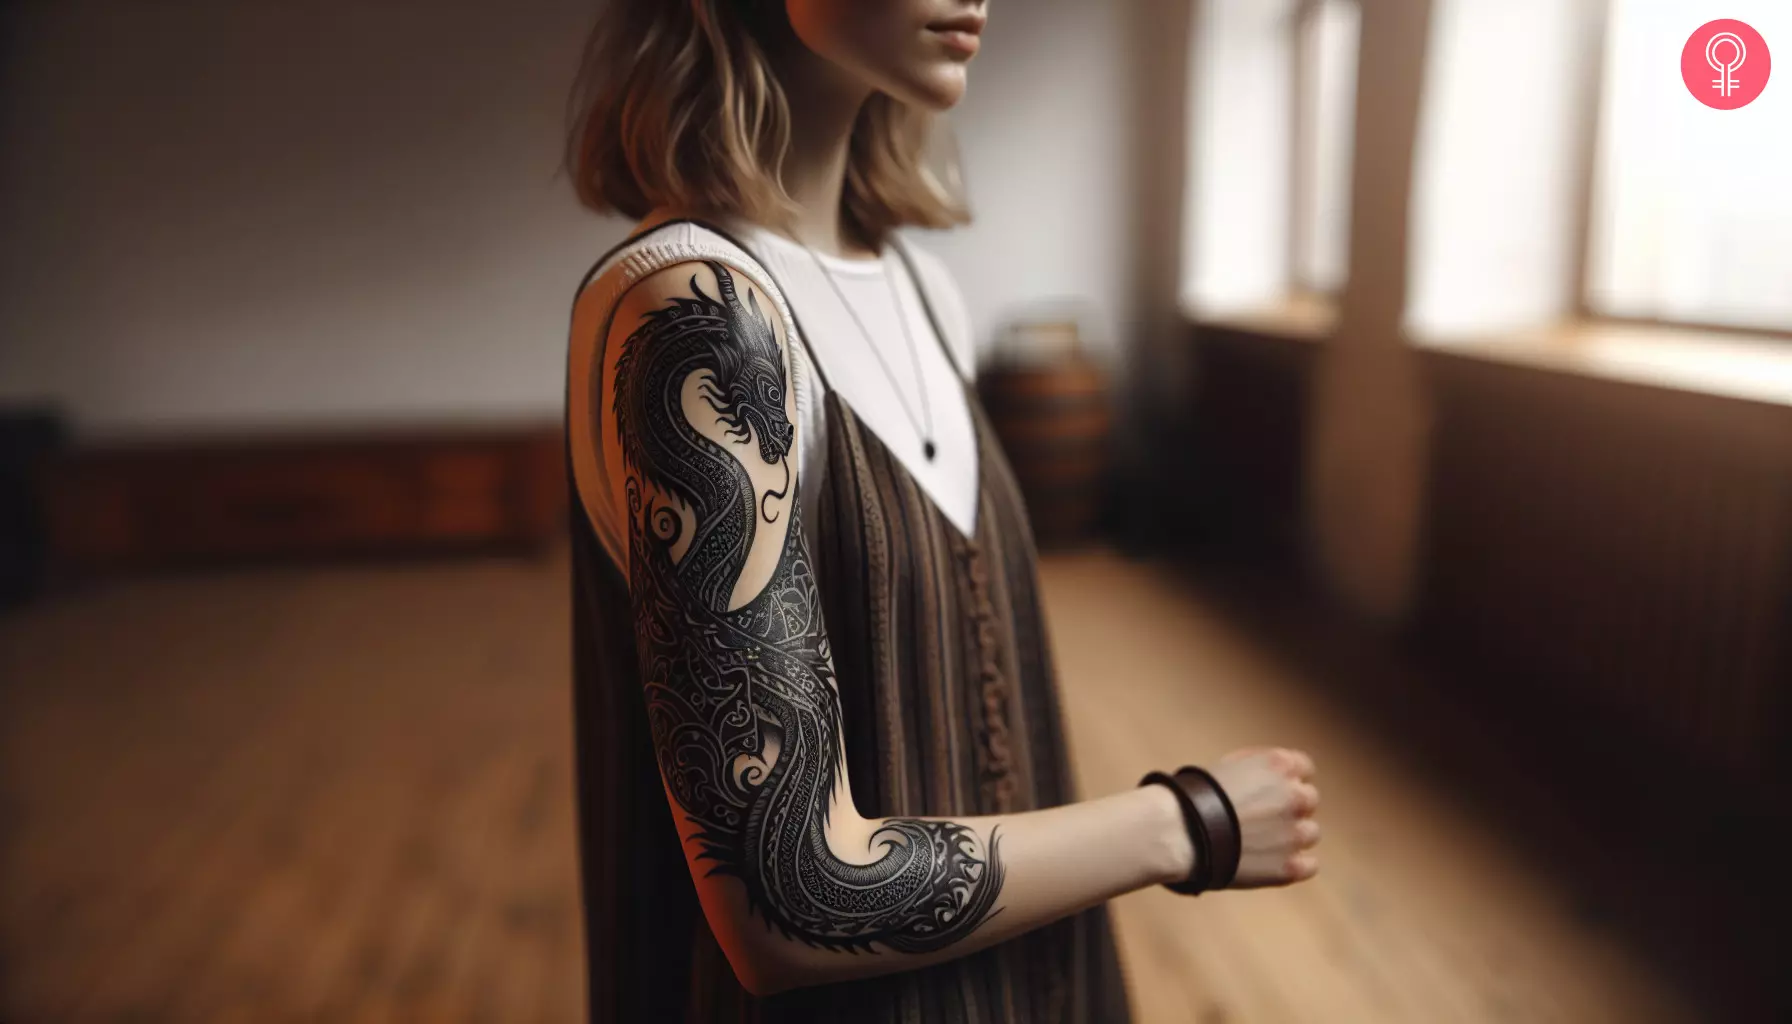 A detailed Viking dragon tattoo on the arm